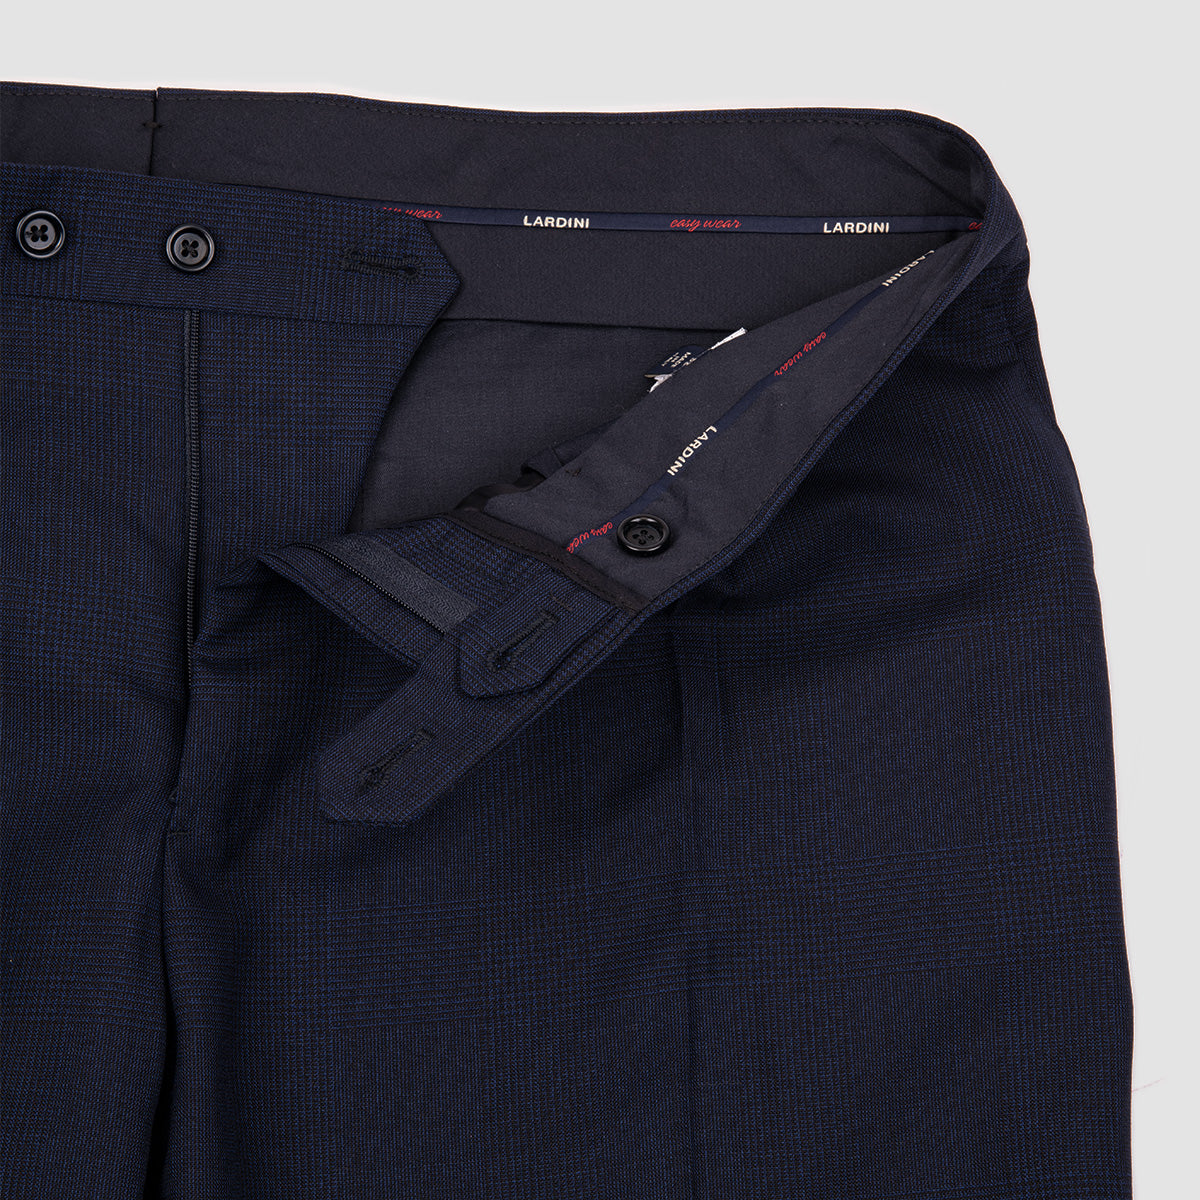 Navy Prince of Wales Easy Wear Suit - Navy